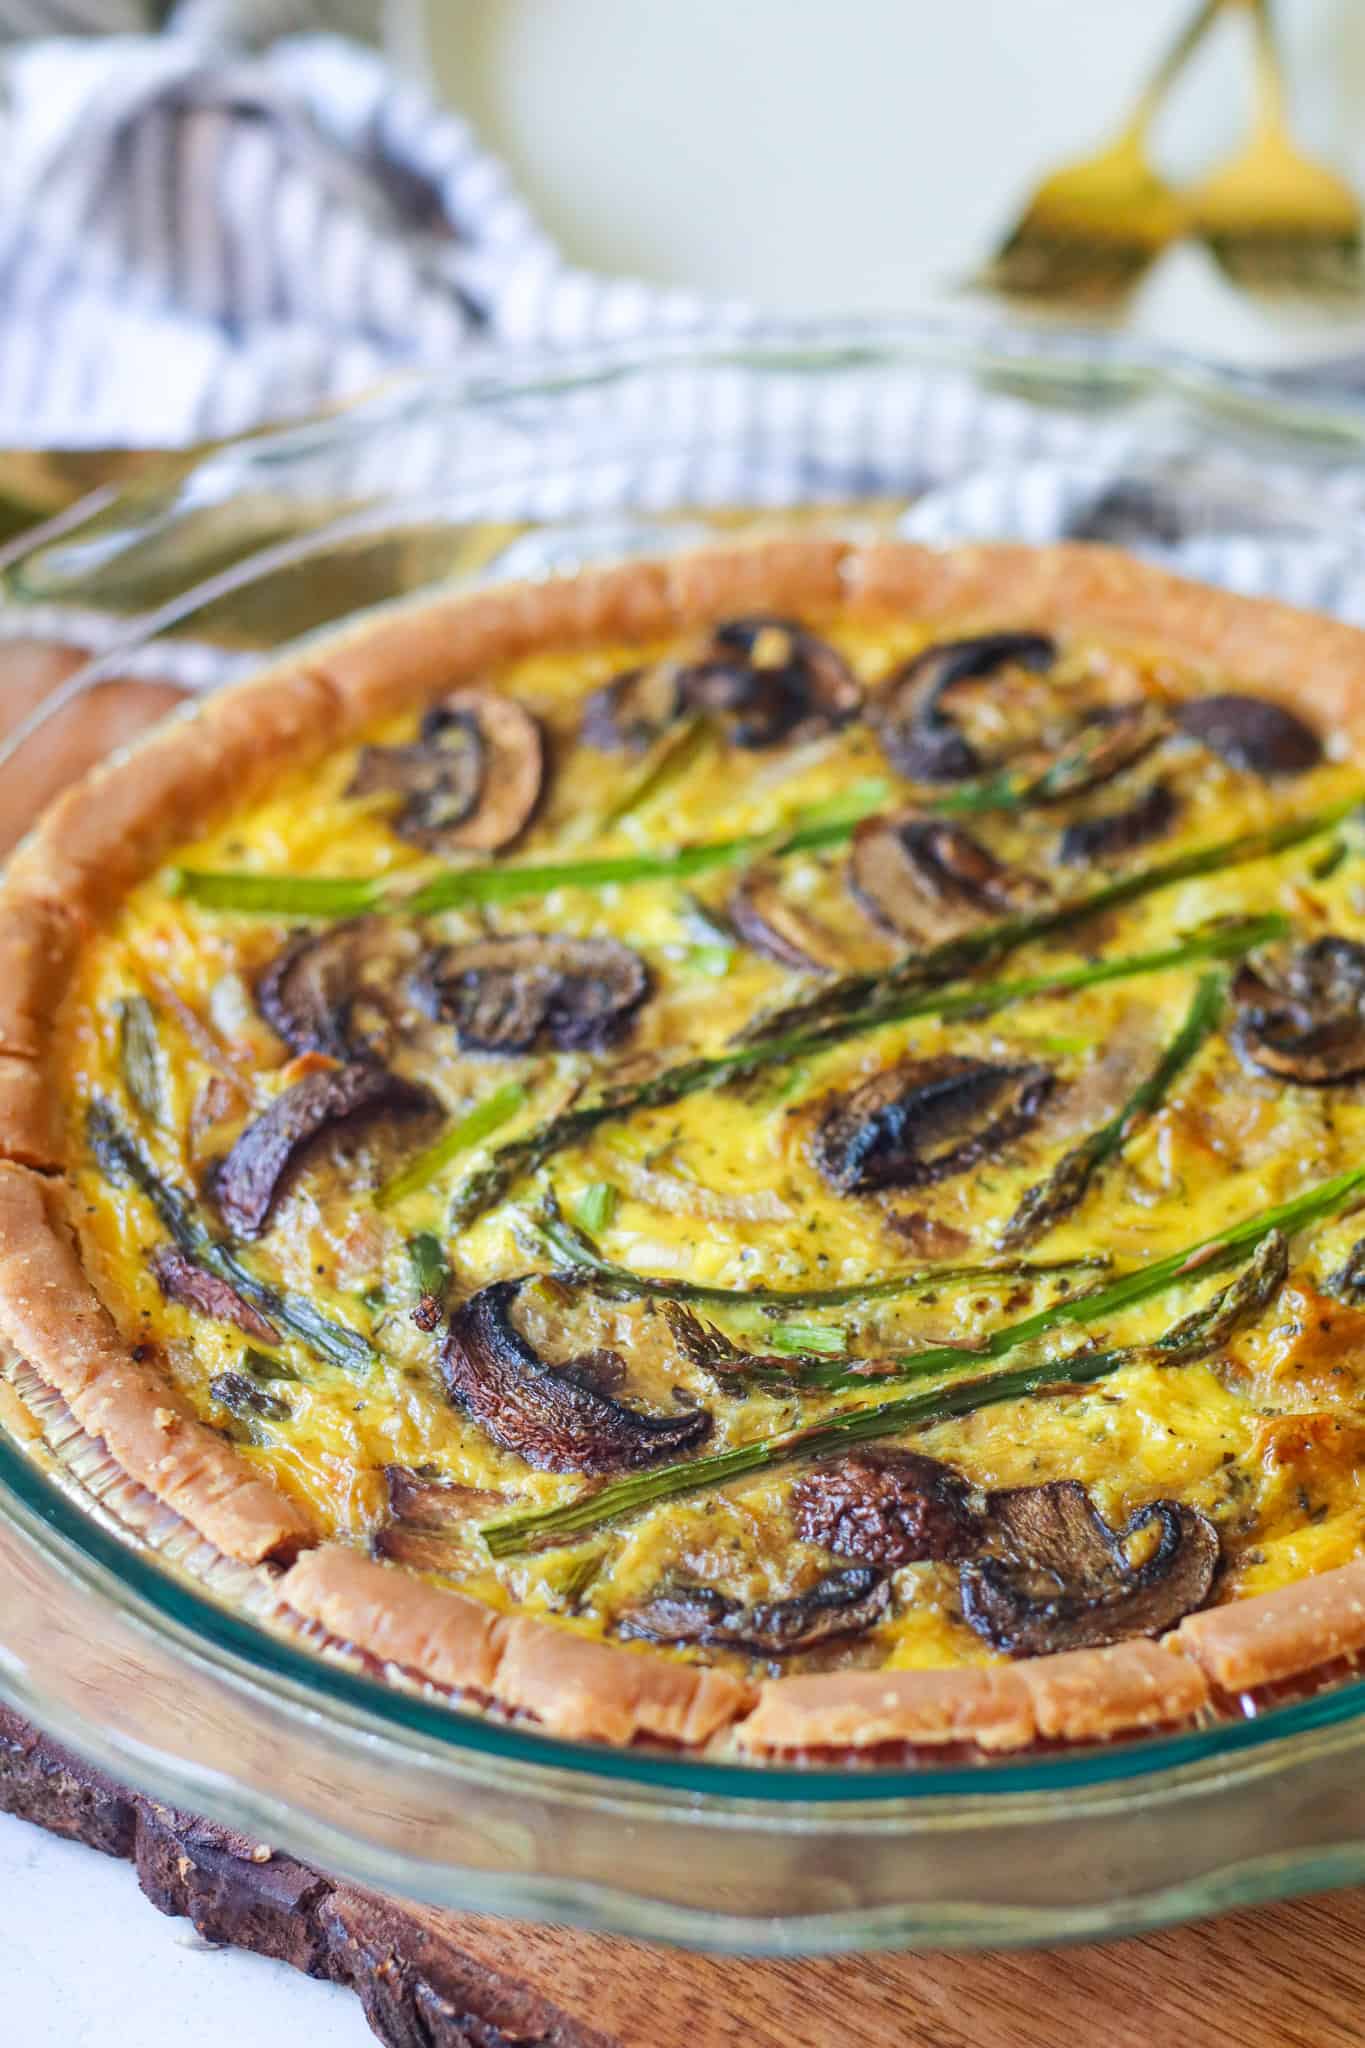 JUST Egg Quiche with Asparagus - Good Food Baddie